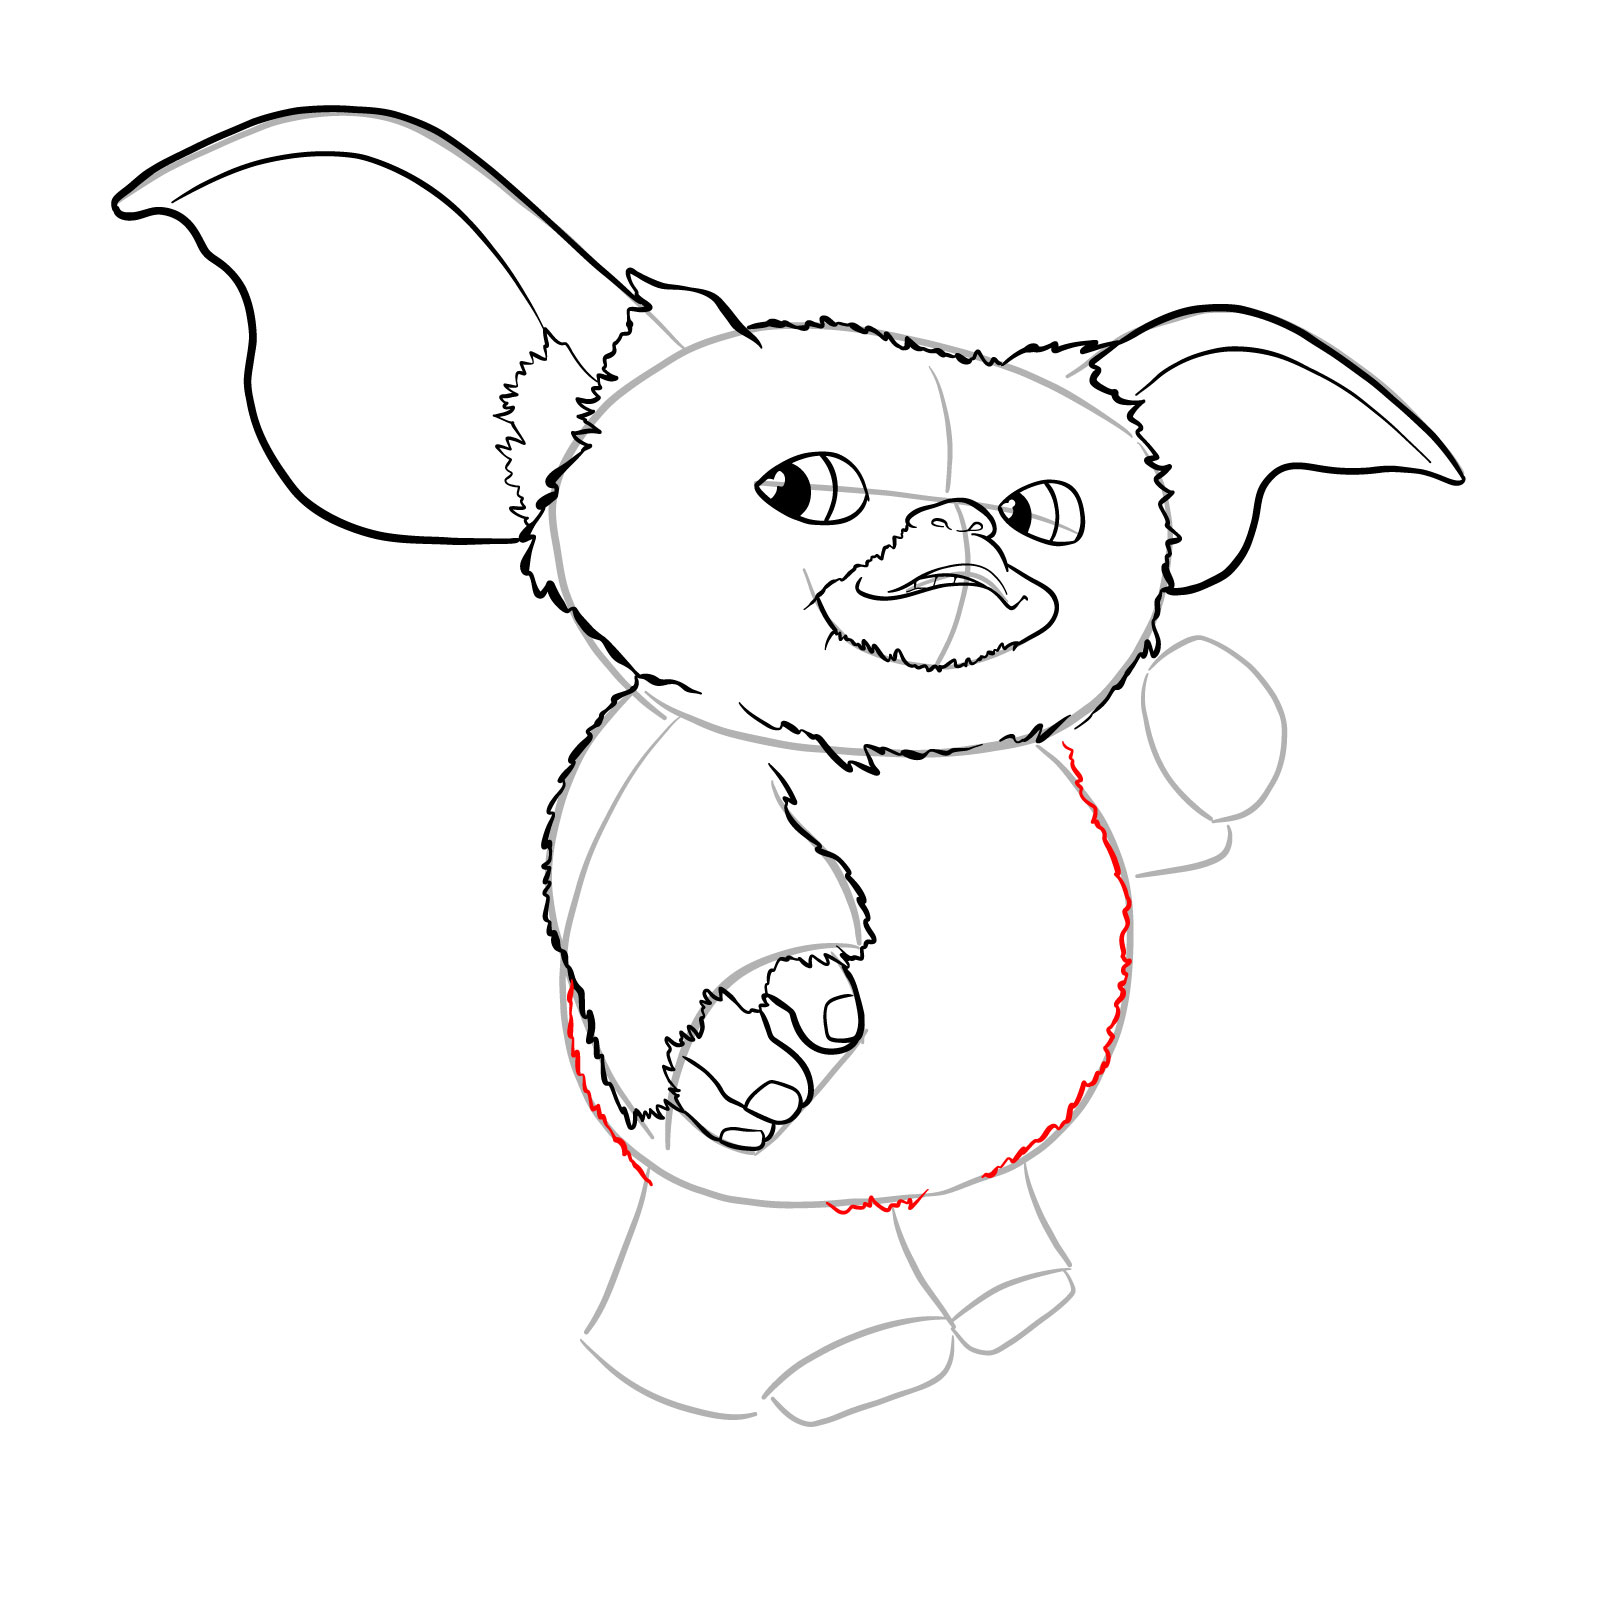 How to draw a Gremlin - step 20